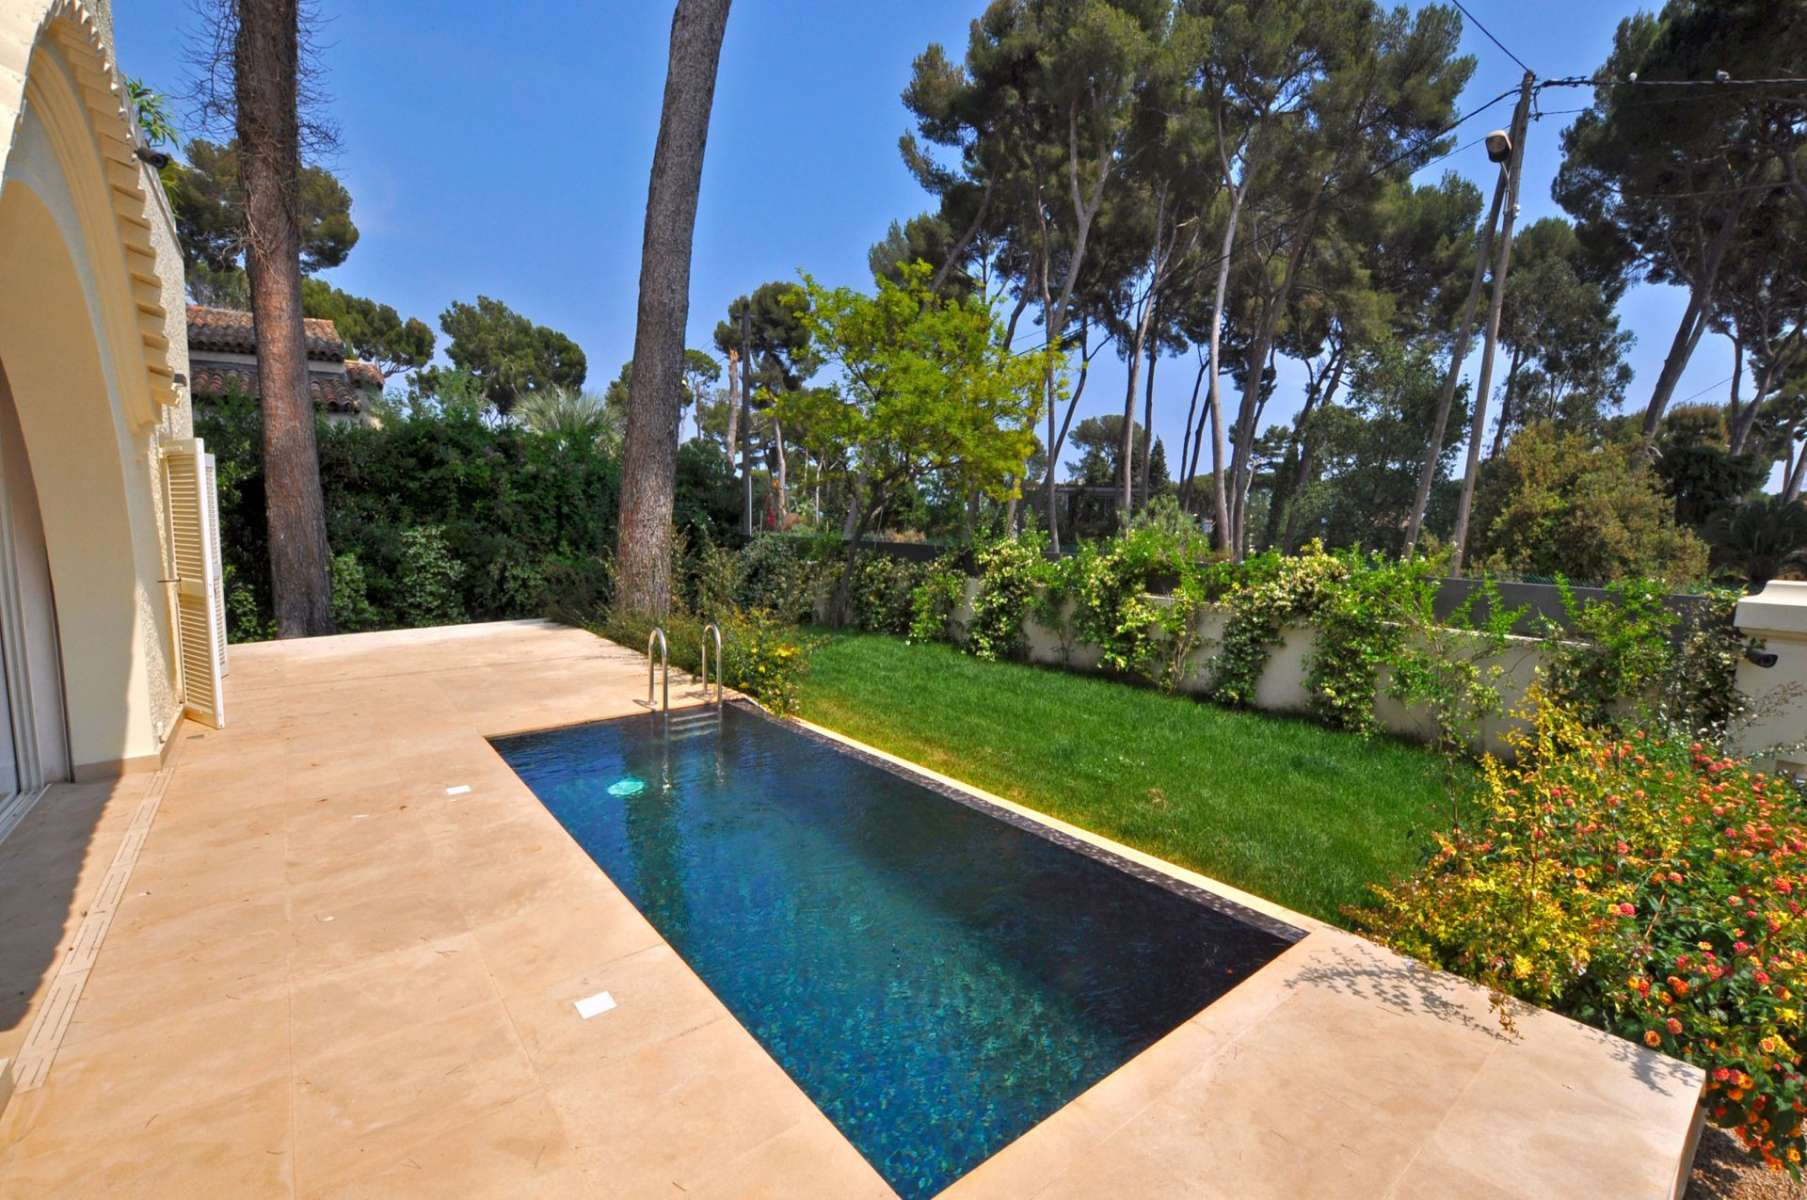 Villa in Cap d’Antibes completely renovated, close to the sea